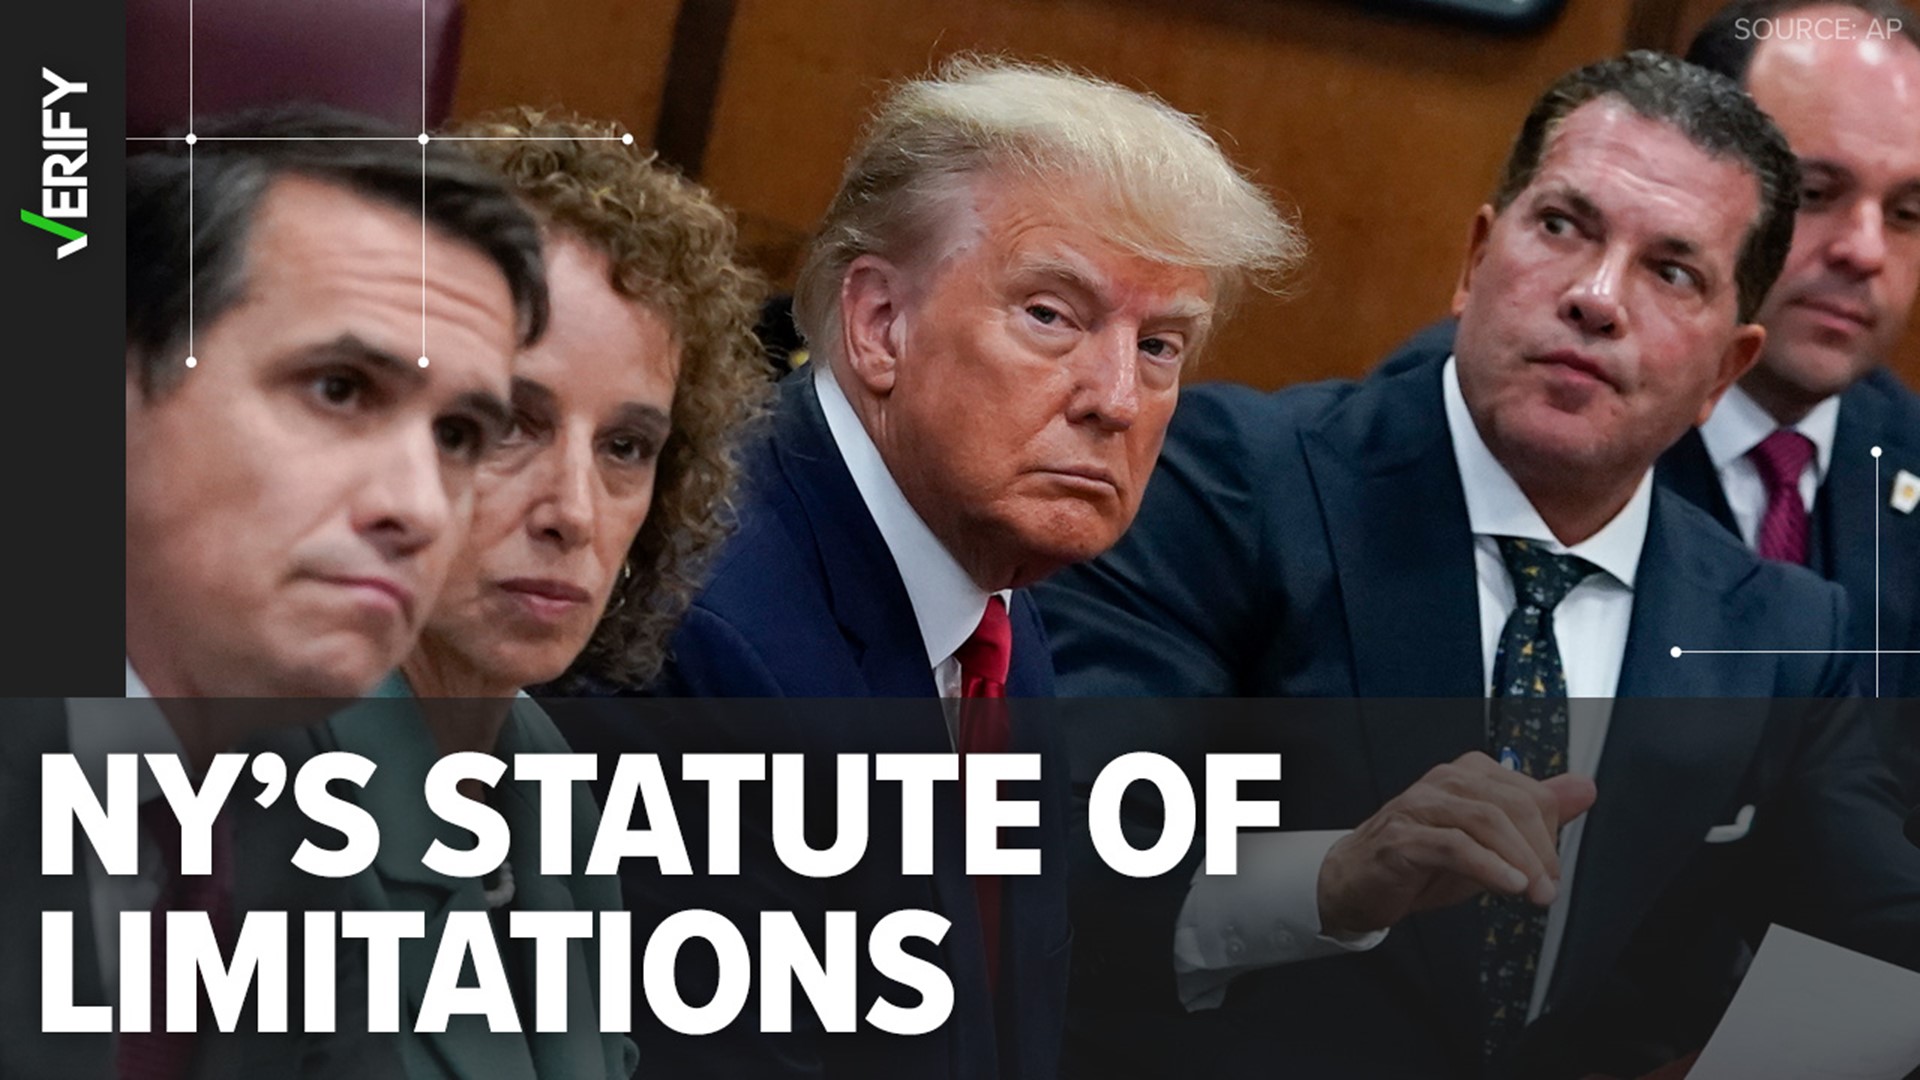 Many people have argued that the statute of limitations has run out on the charges against former President Trump. Here’s what we can VERIFY about New York law.